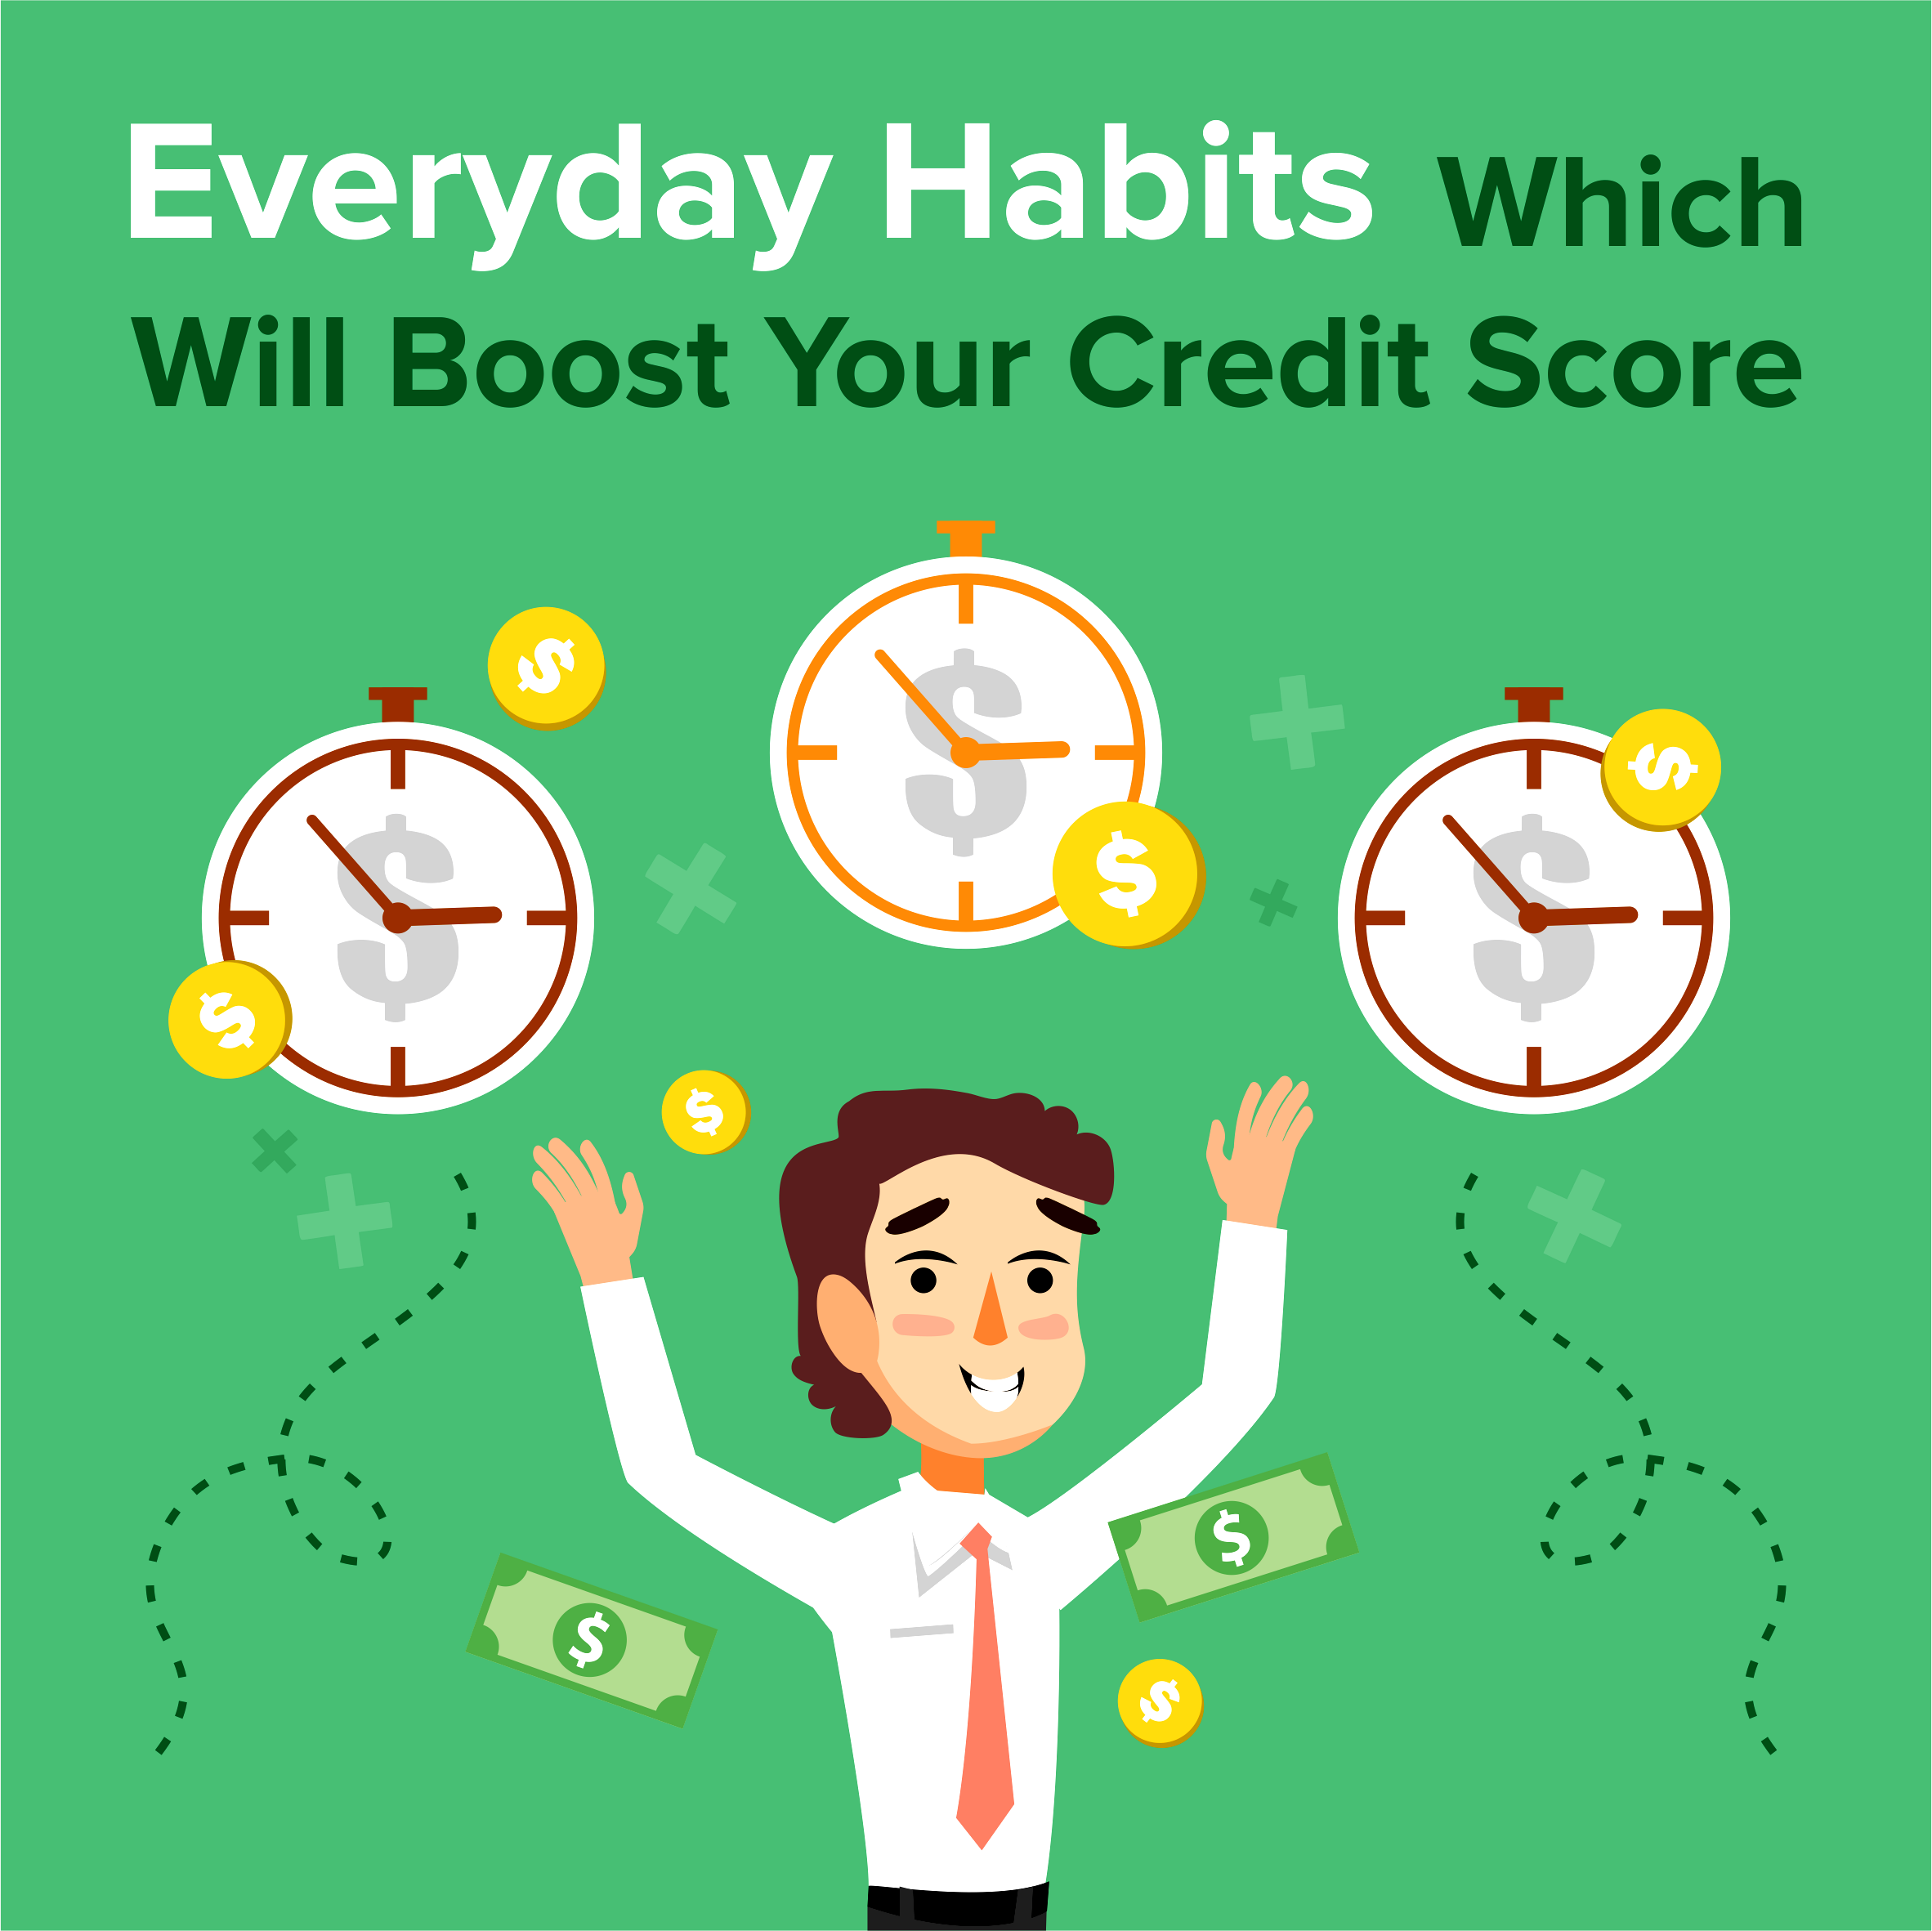 Everyday Habits That Will Boost Your Credit Score